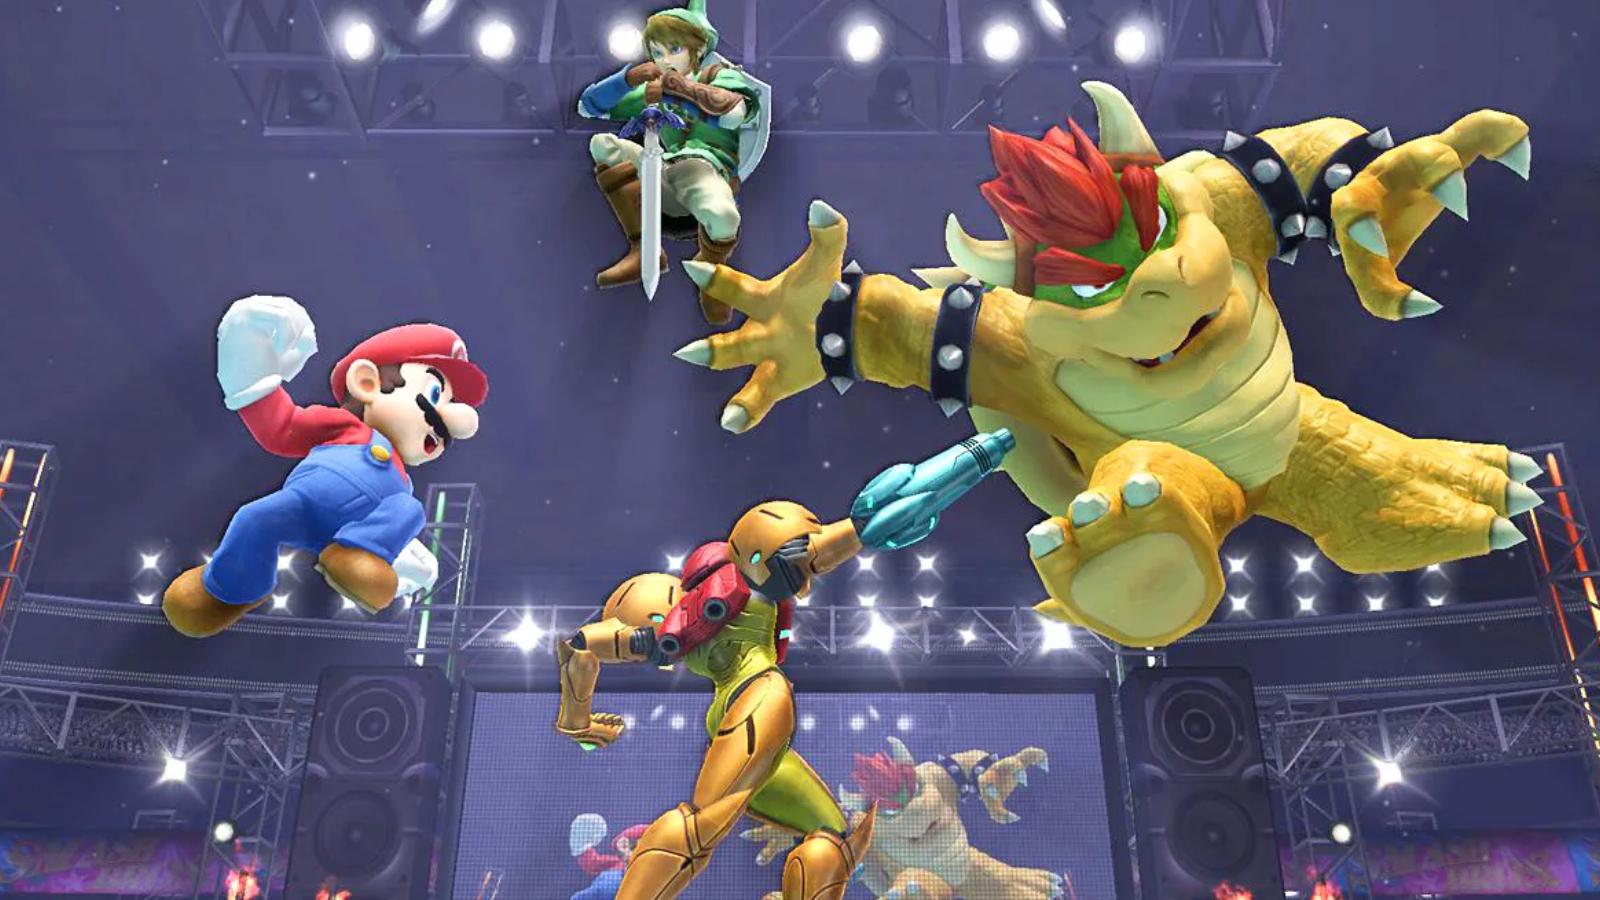 mario fighting with link, bowser and samus in super smash bros